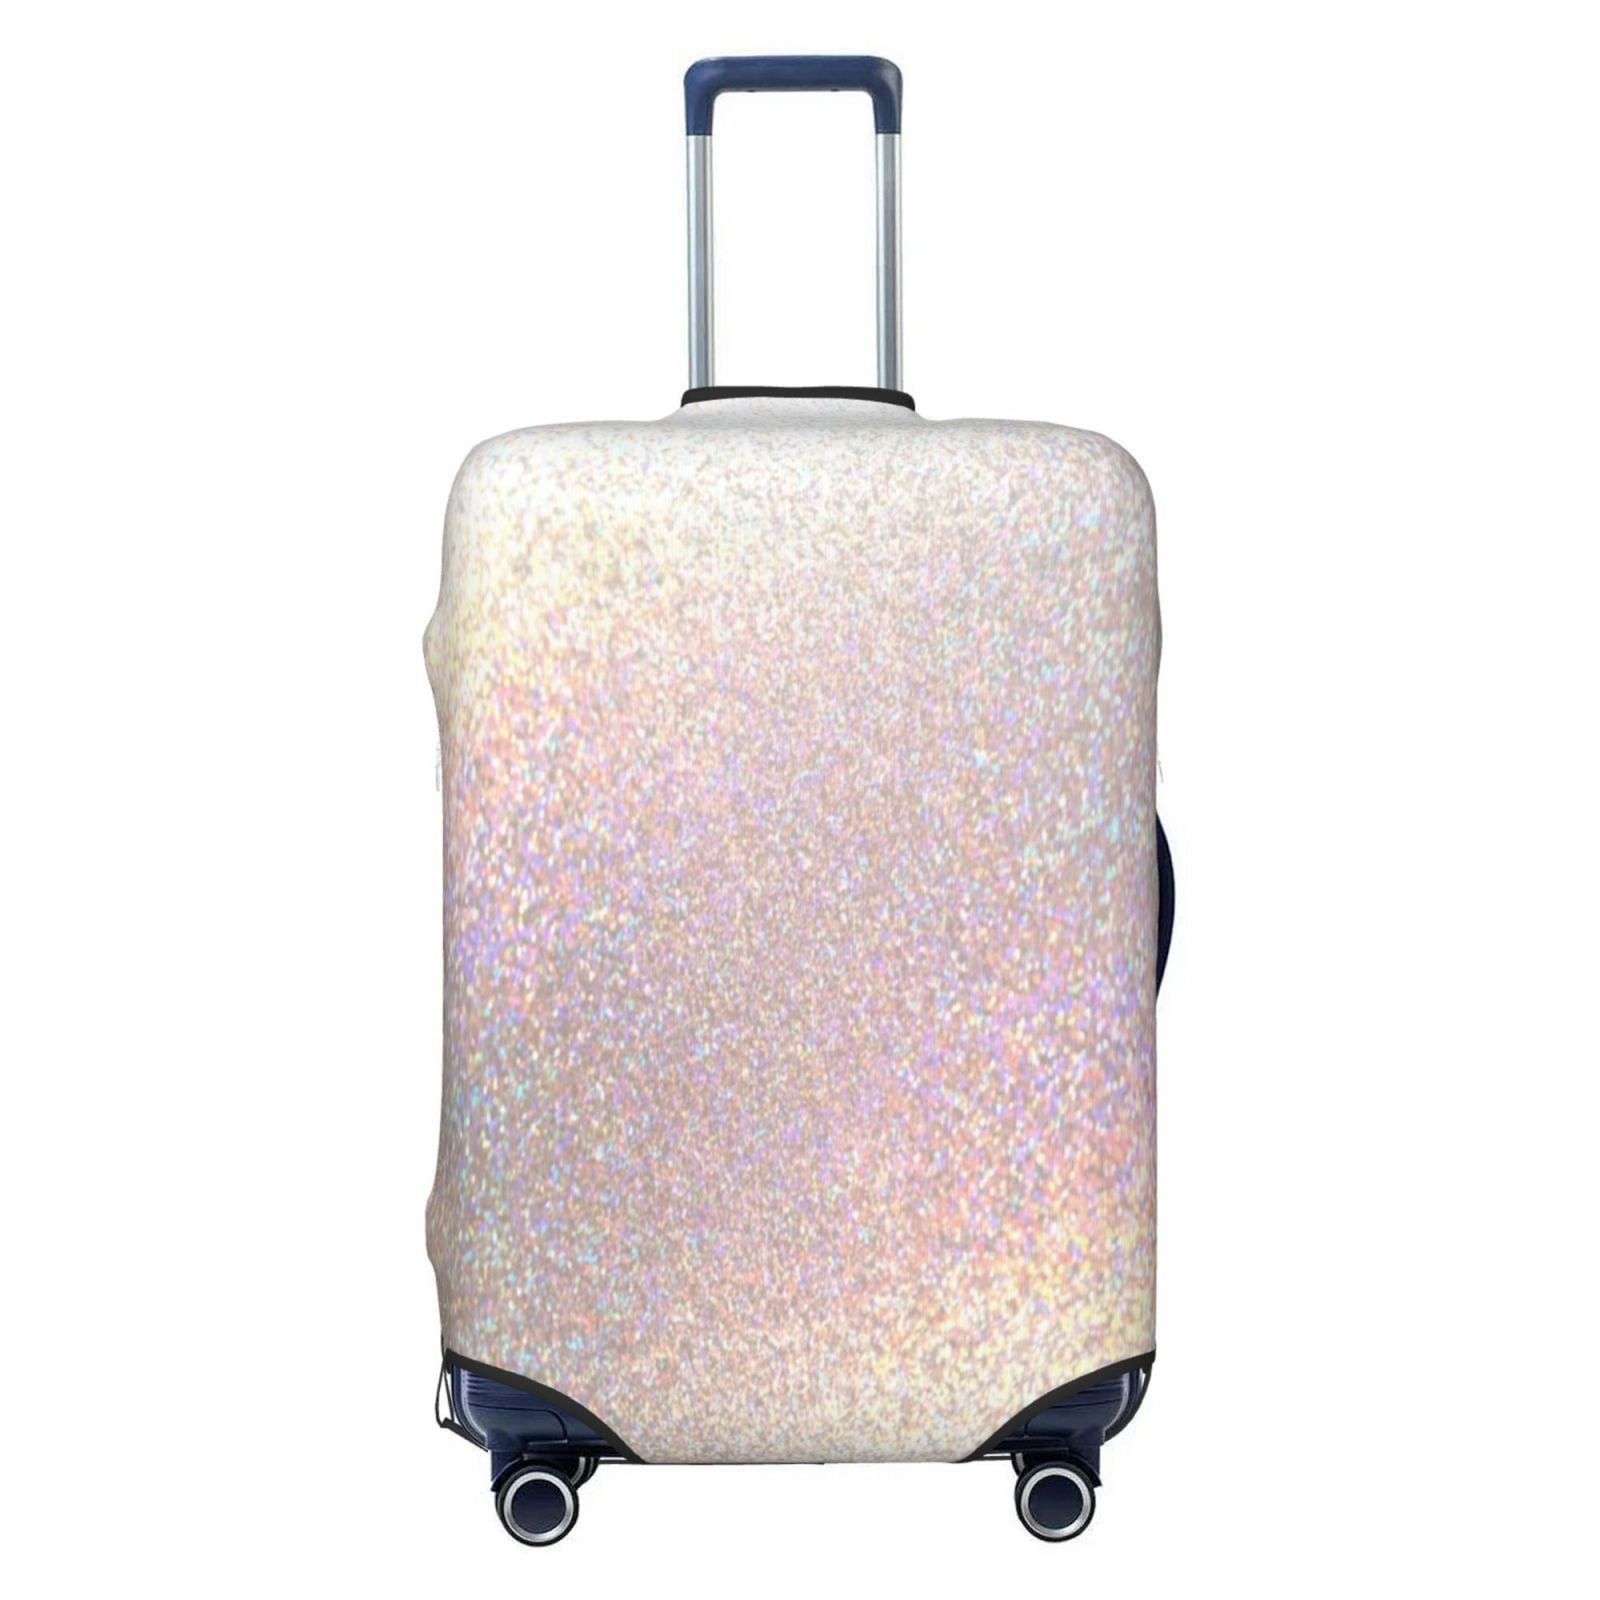 Gaeub Glitter Light Pearl Elastic Luggage Cover with Concealed Zipper ...